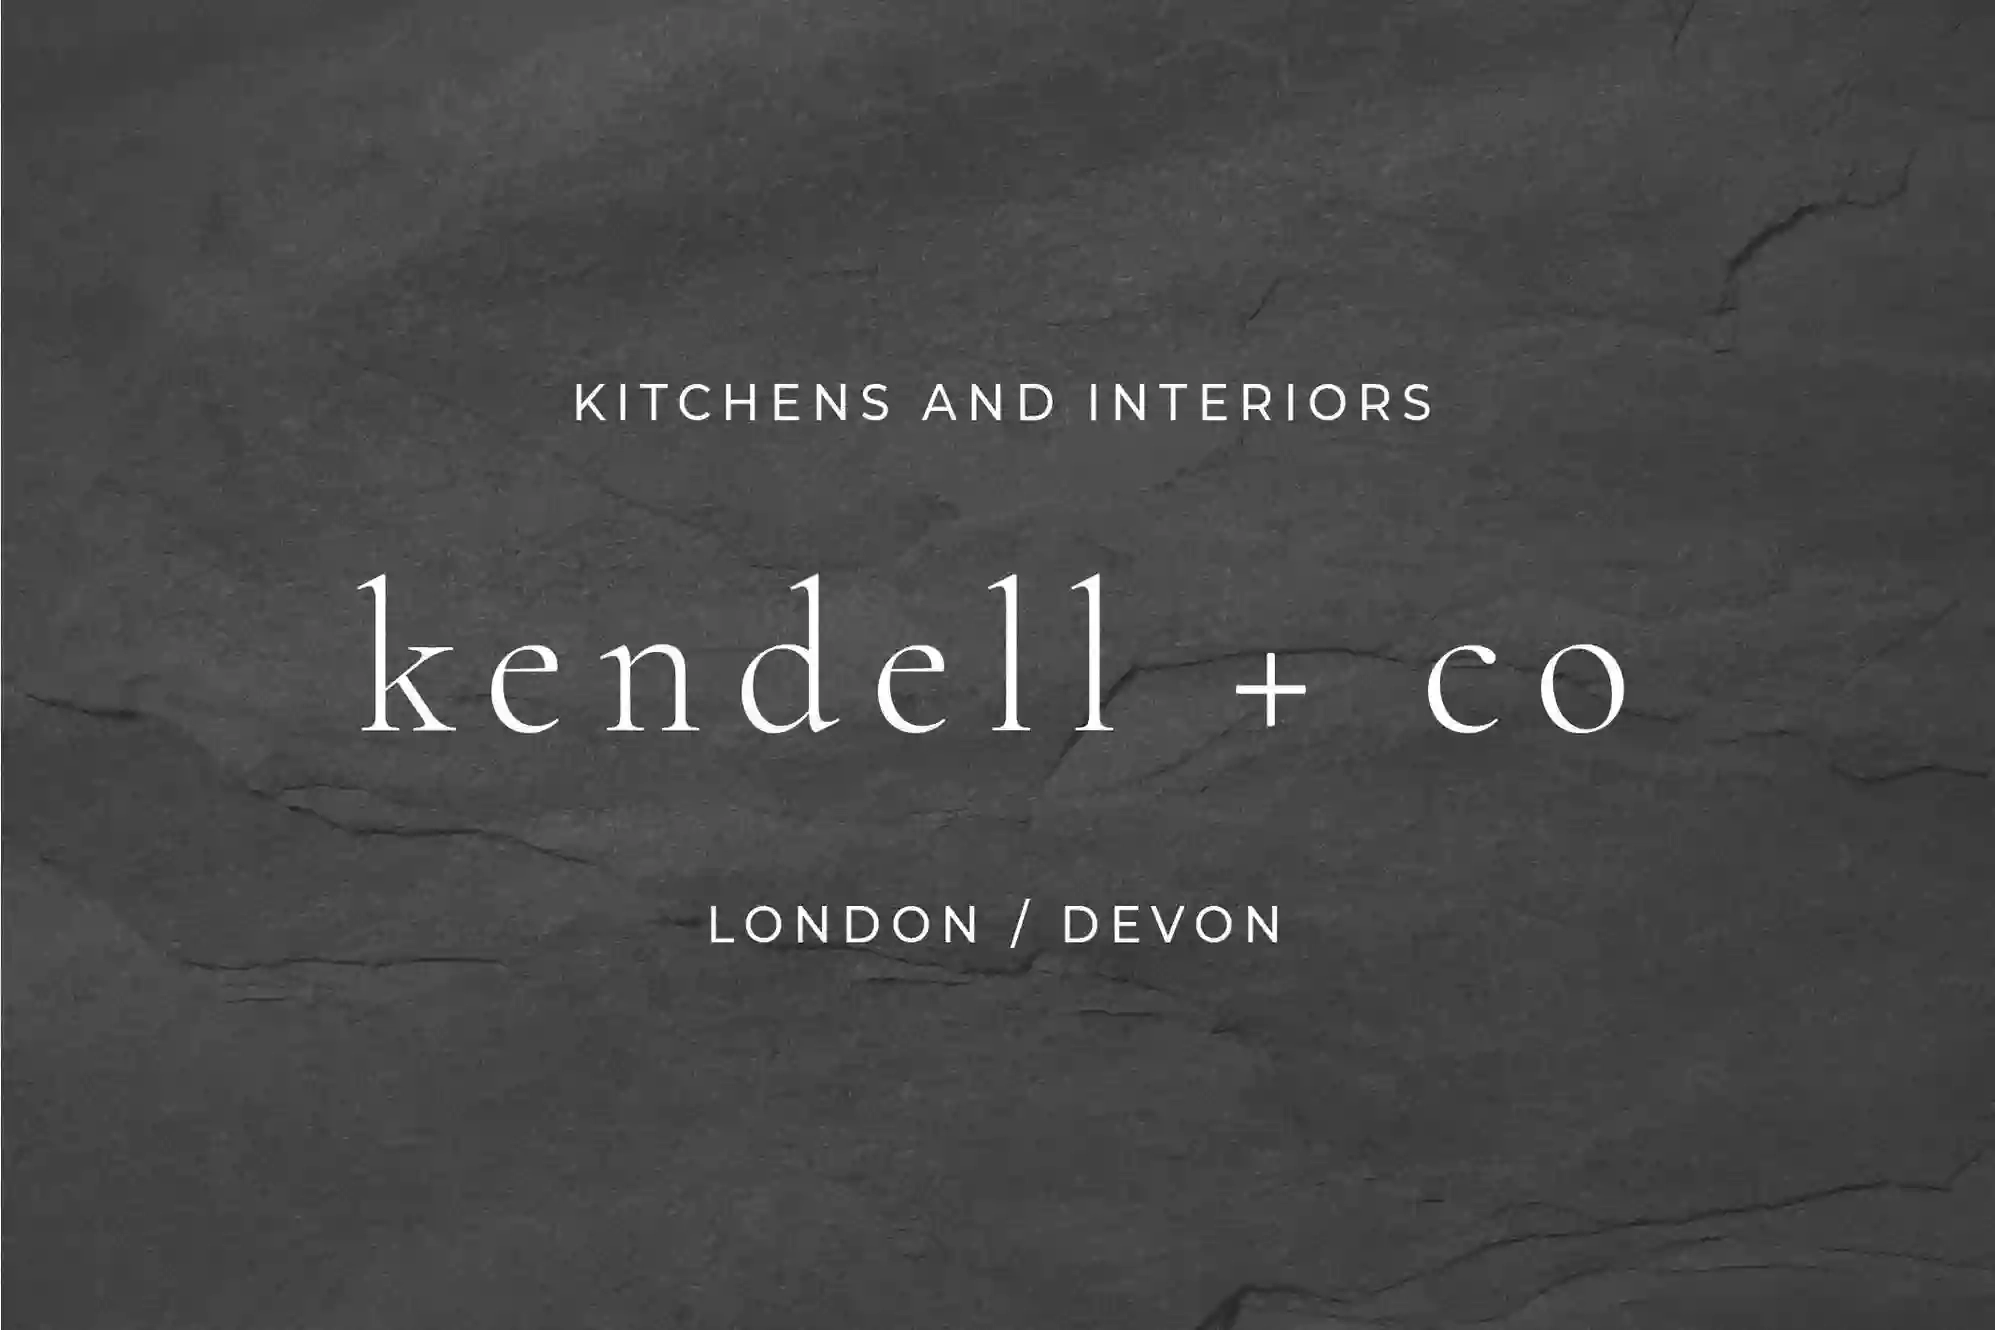 Kendell + Co Kitchens and Interiors